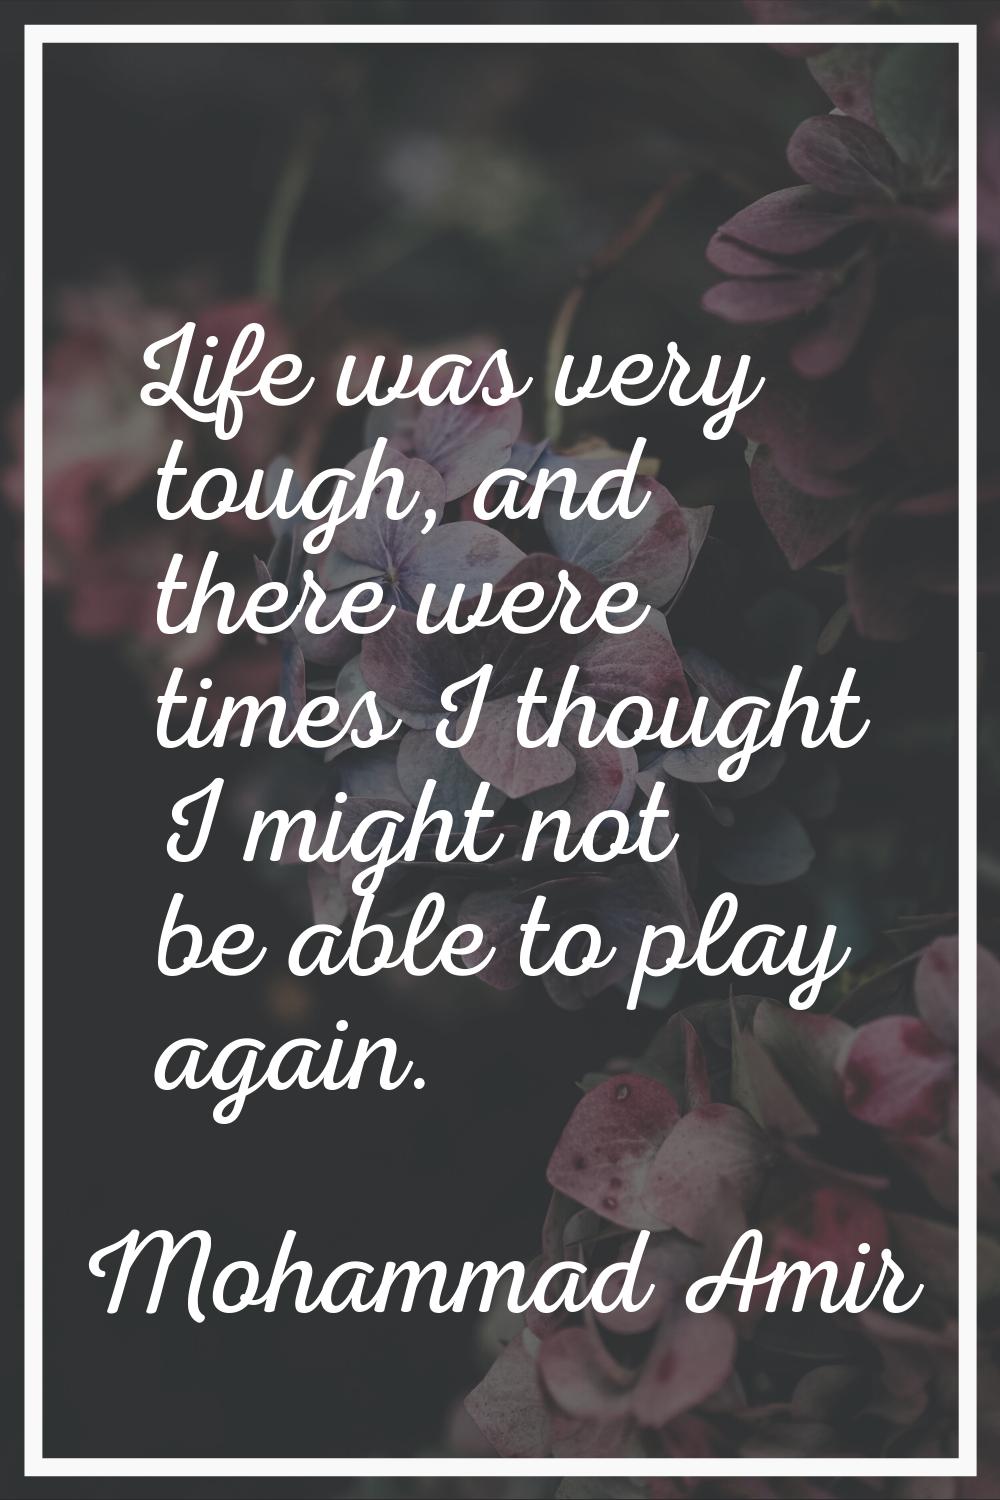 Life was very tough, and there were times I thought I might not be able to play again.